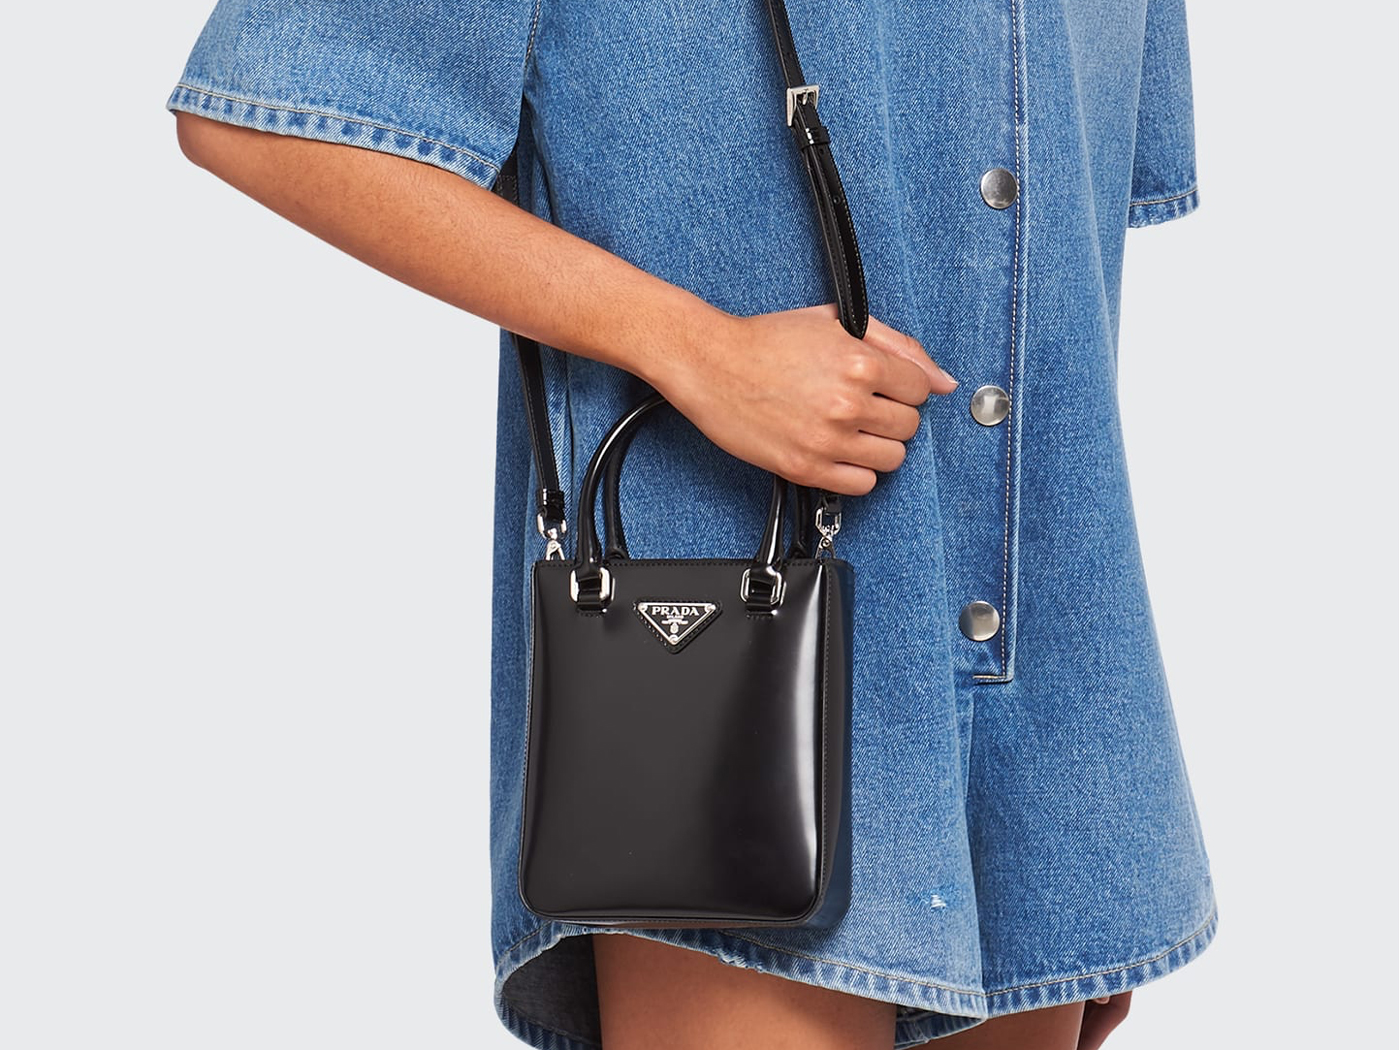 The Louis Vuitton Petit Sac Plat is NOT for everyone!! Its cute but